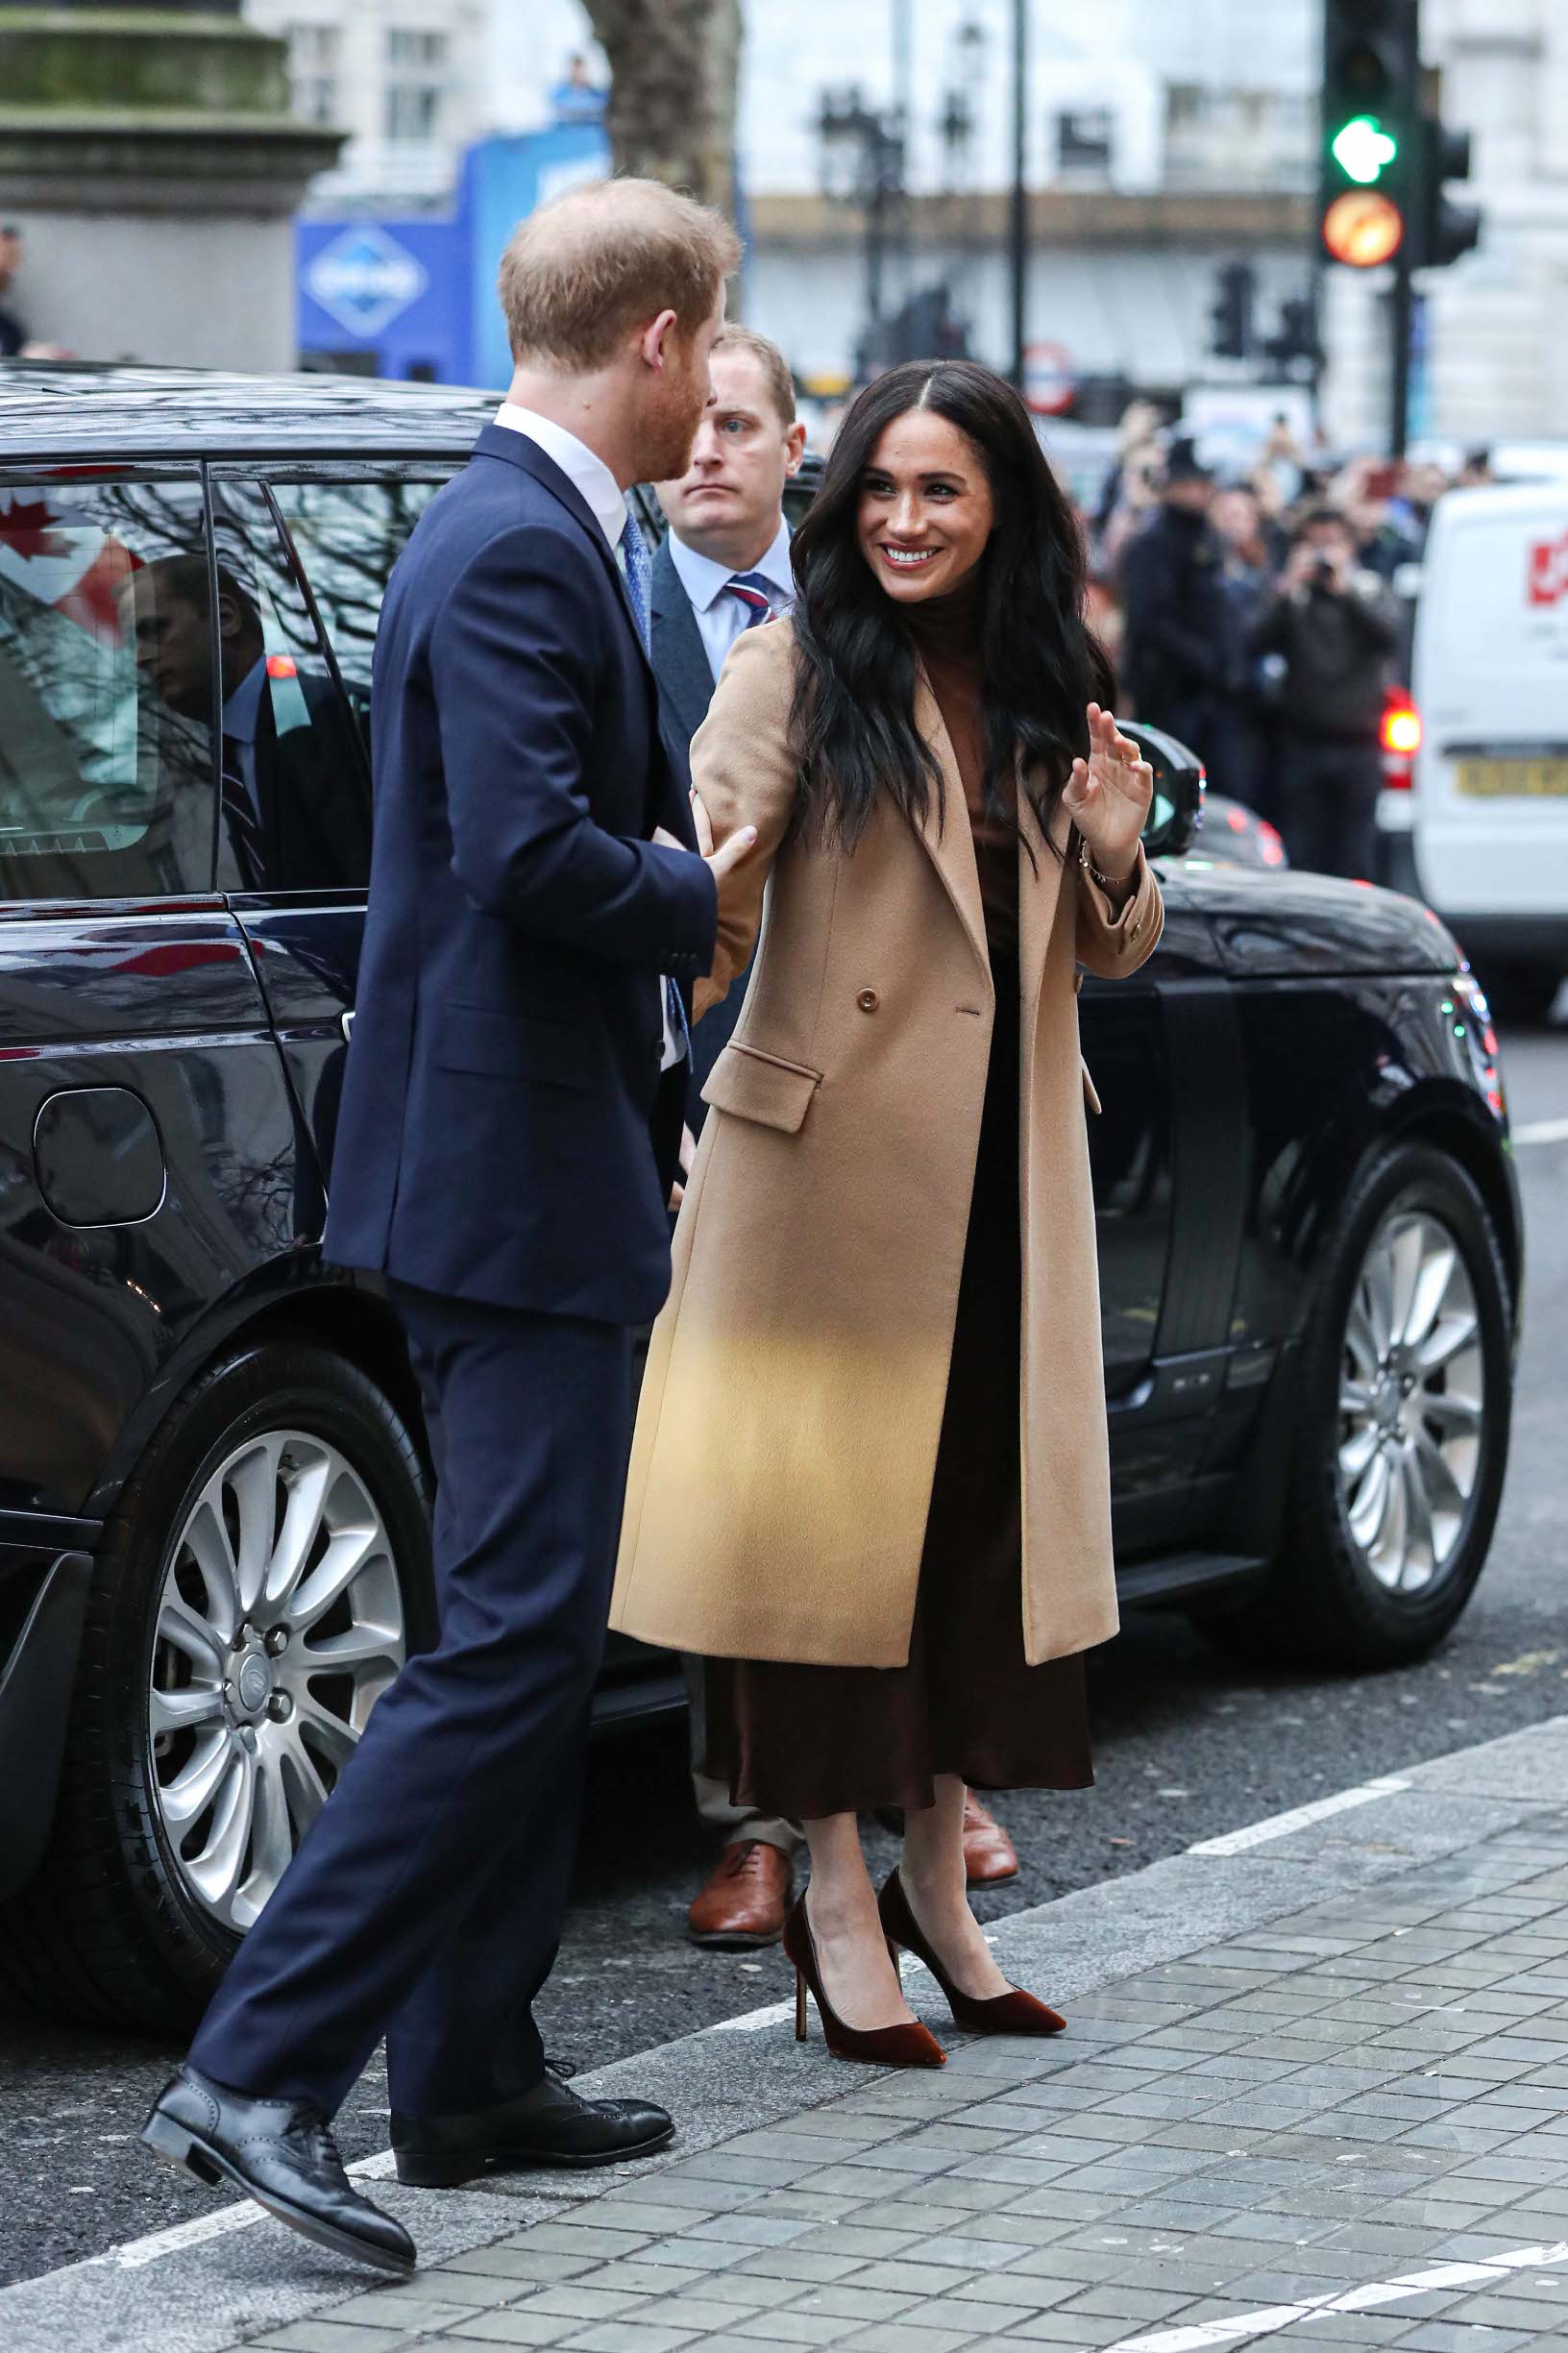 LONDON, ENGLAND - JANUARY 07: Prince Harry, Duke of Sussex and Meghan, Duchess of Sussex arrive at Canada House on January 07, 2020 in London, England. (Photo by Chris Jackson/Getty Images)